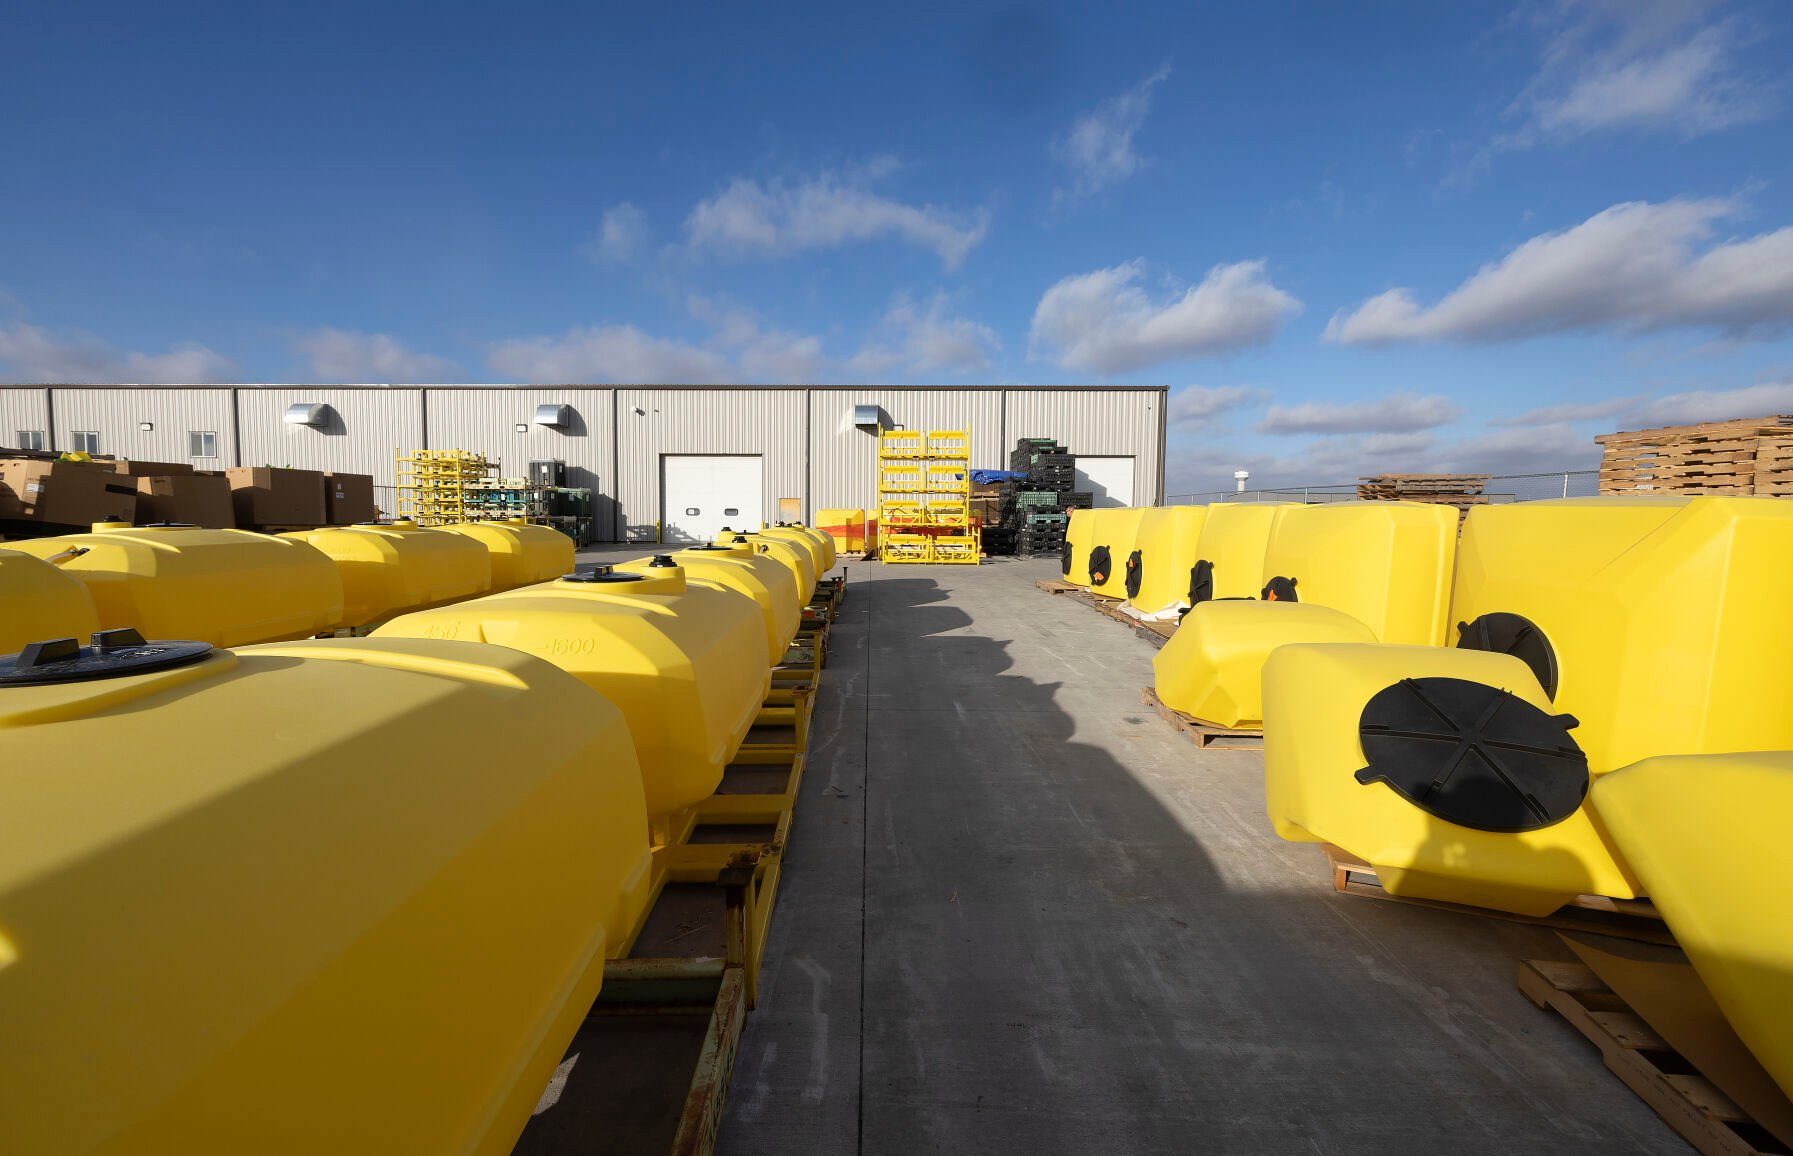 Finished hoppers for Deere & Co. wait for delivery.    PHOTO CREDIT: Stephen Gassman